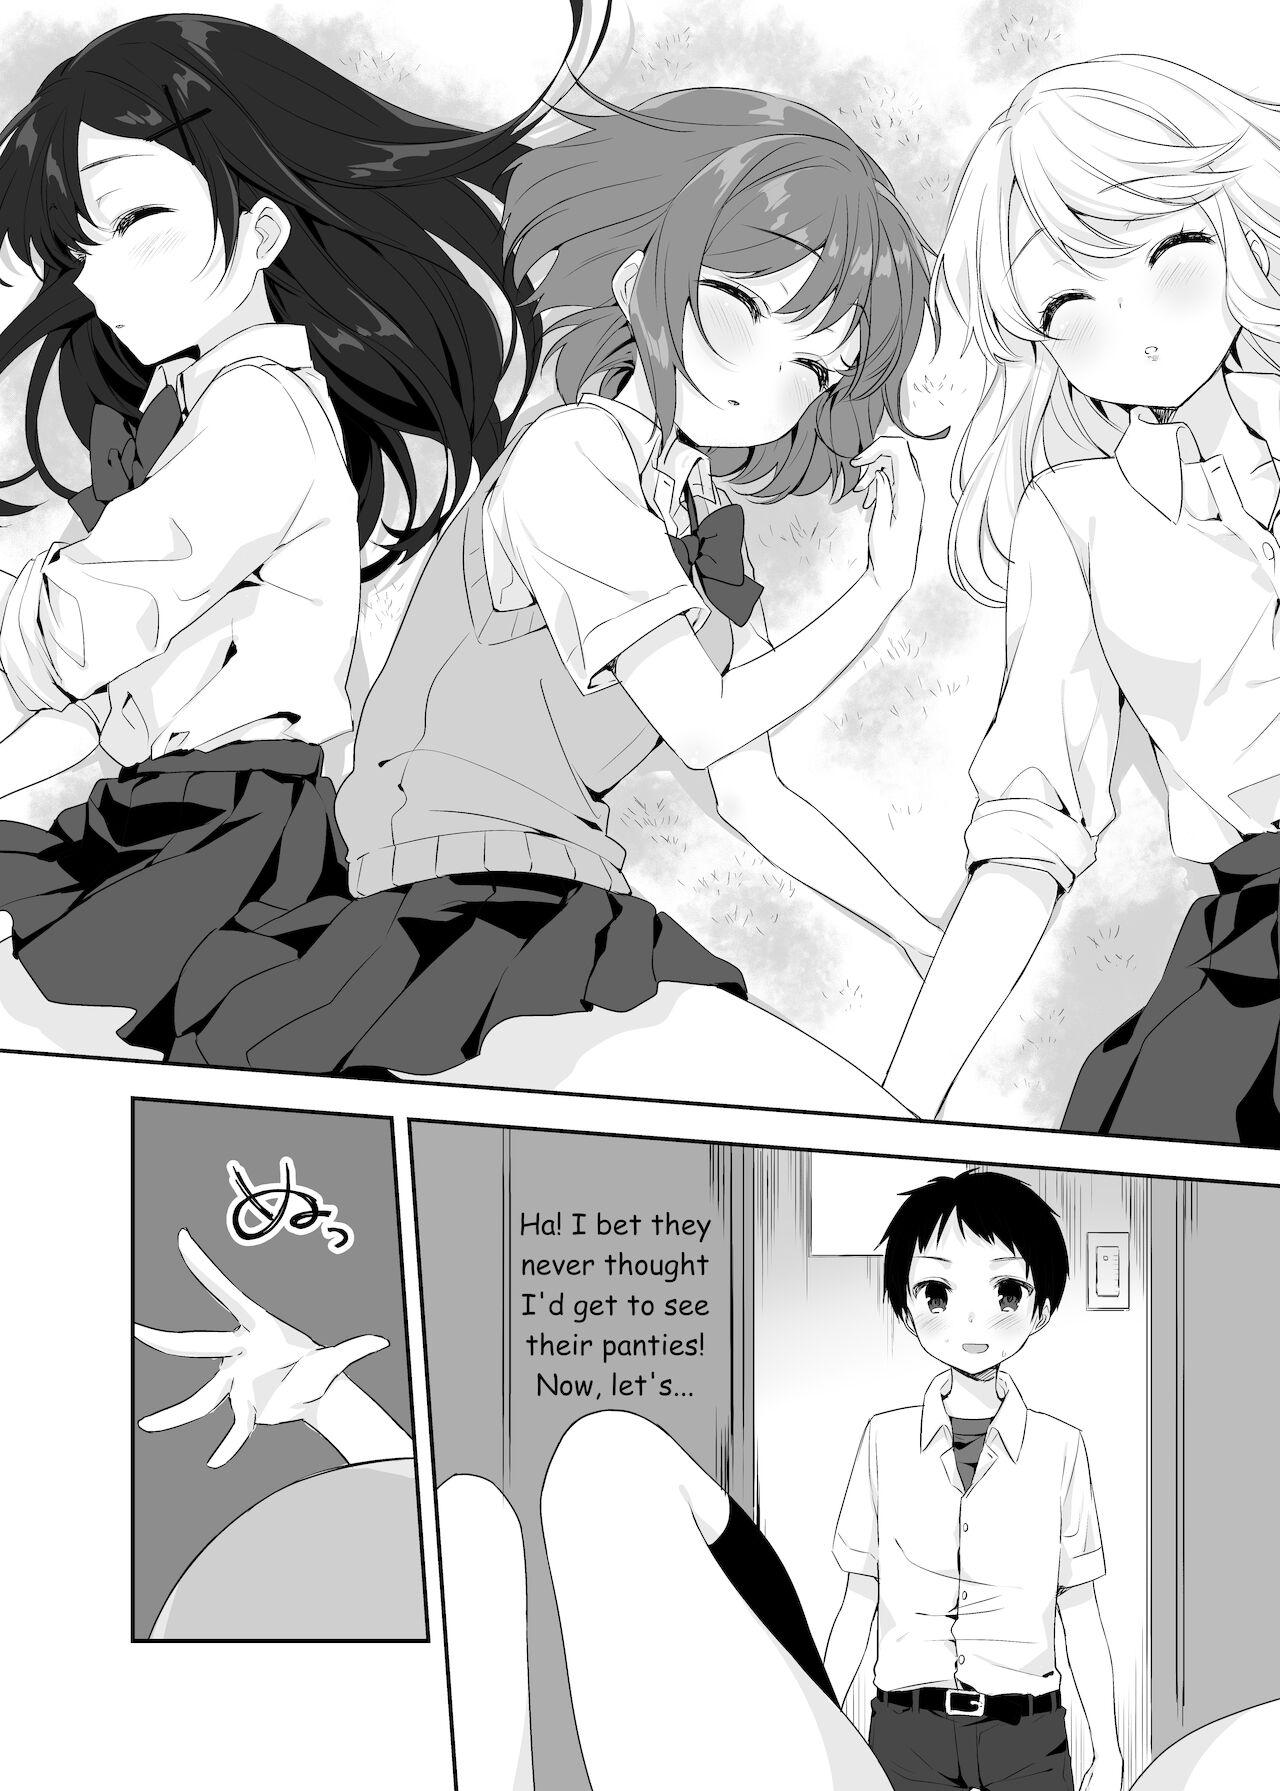 Boku no Onee-chan to Tomodachi wo Nemurasete Osottemitara Kaeriuchi ni Atta | The Tables were Turned when I tried to Rape my Sister and her Friends while they were Asleep 8